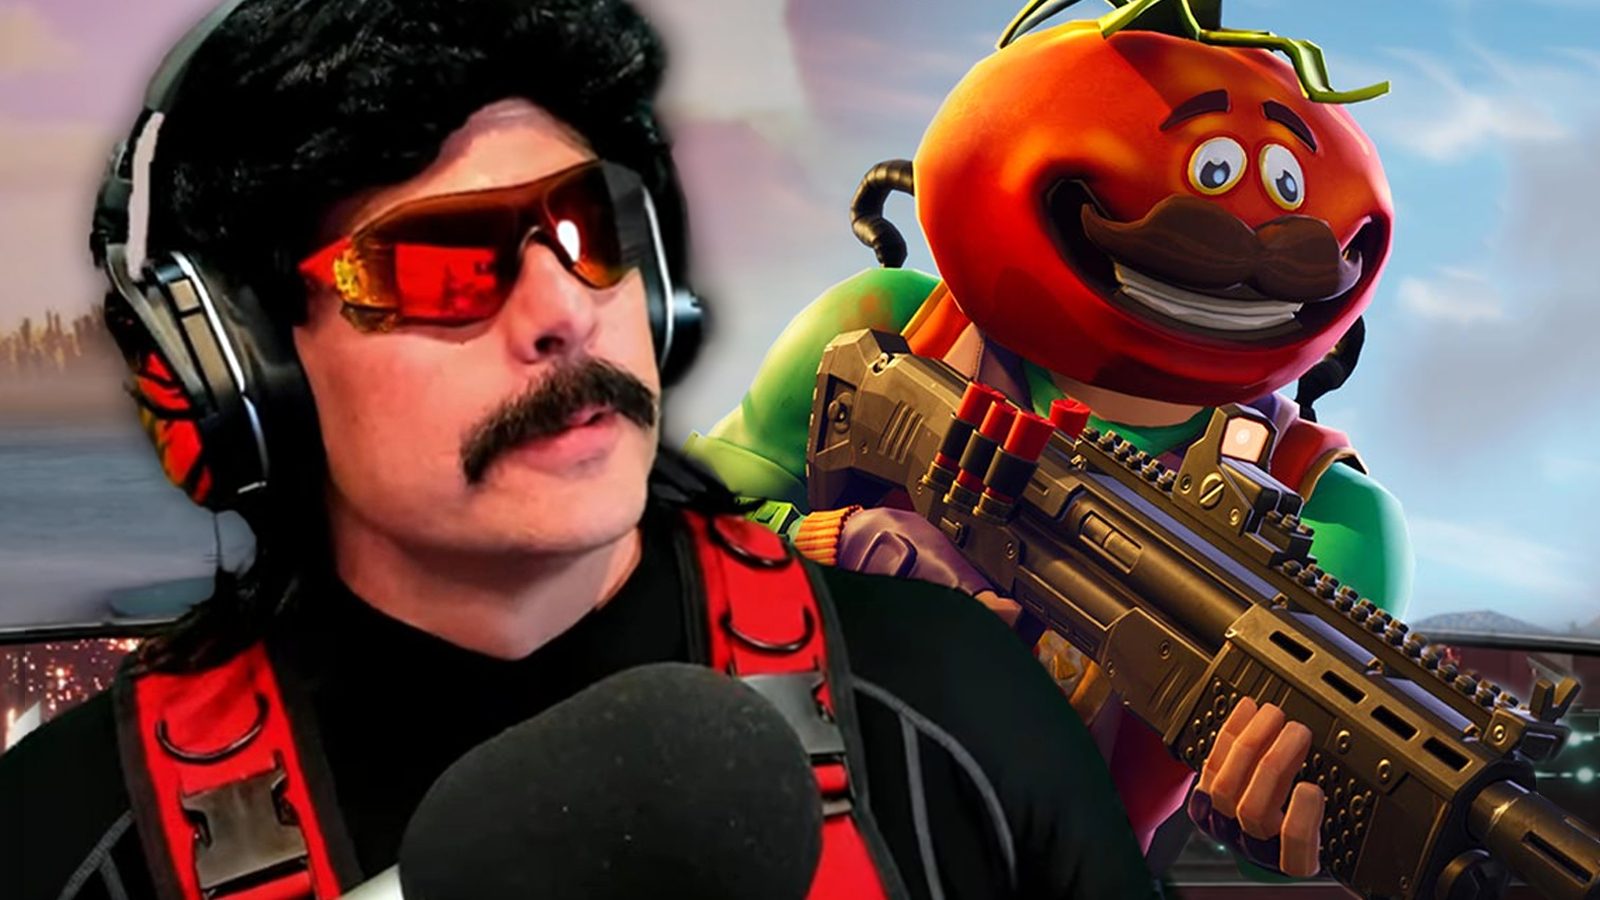 fortnite-finally-wins-over-dr-disrespect-with-no-build-mode-its-actually-really-fun-3310665